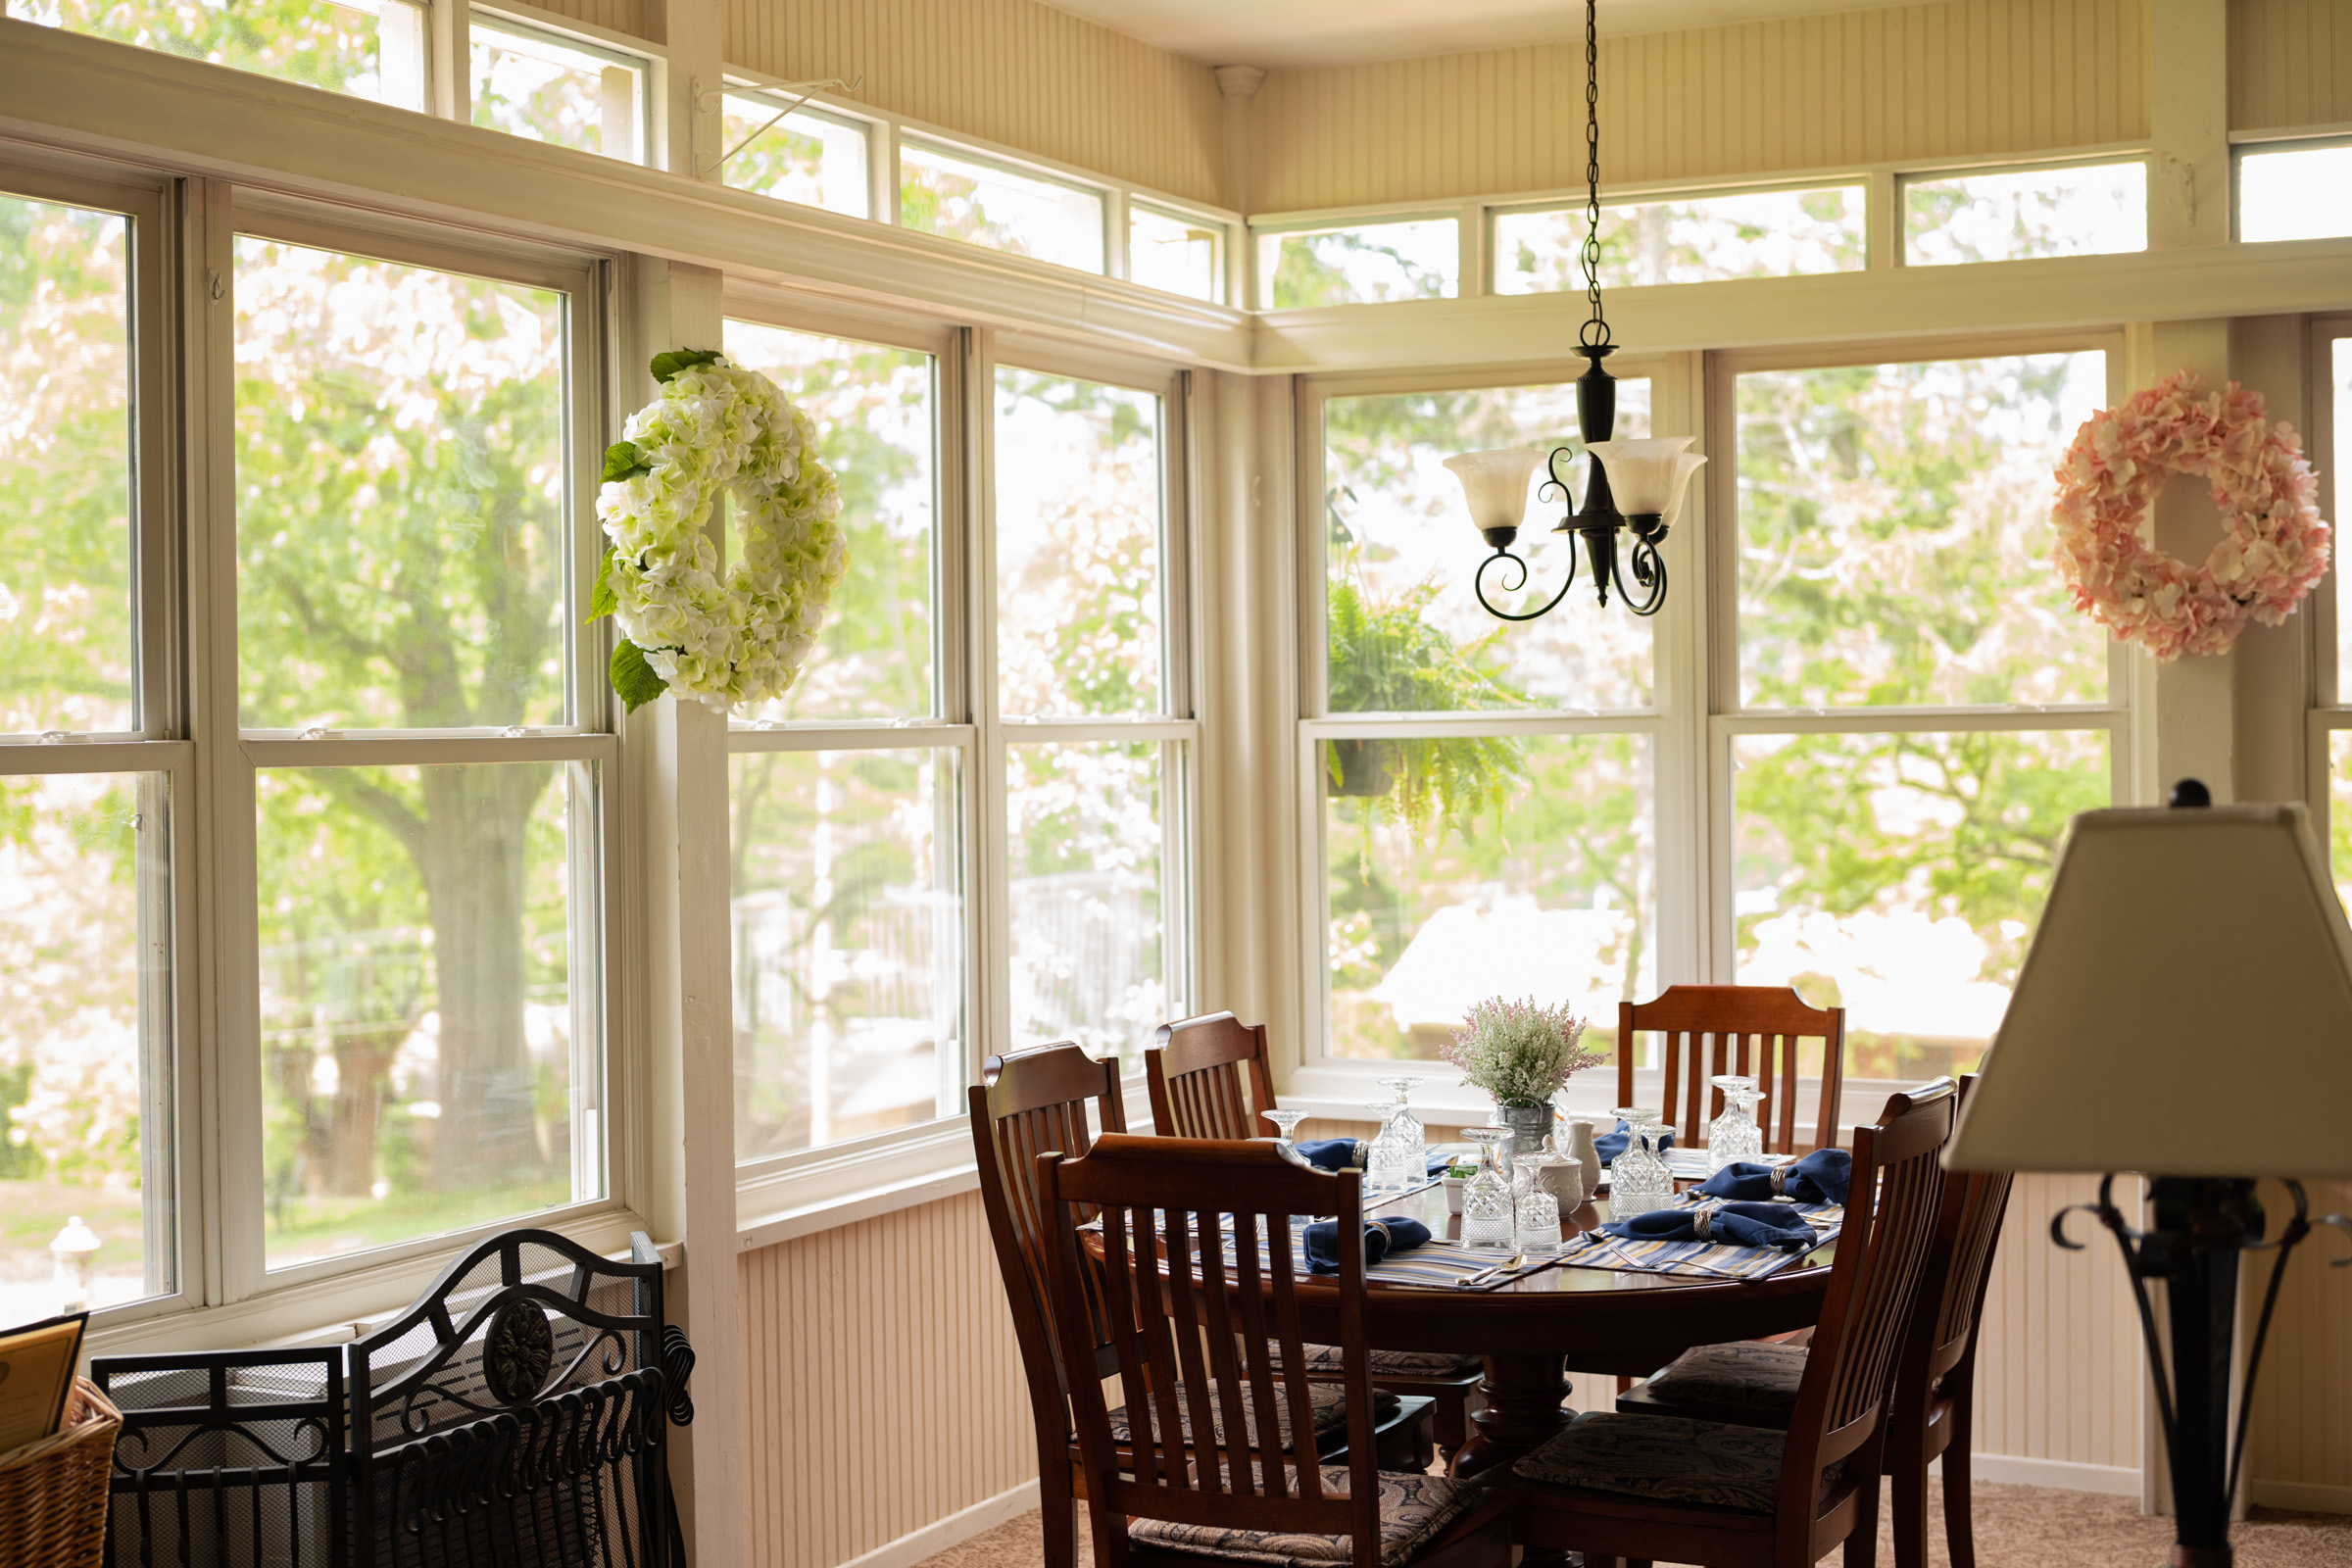 Low light dining room with windows letting in natural light. Hanging chandelier above the wooden table and chairs. You can see neighborhood trees through the windows.